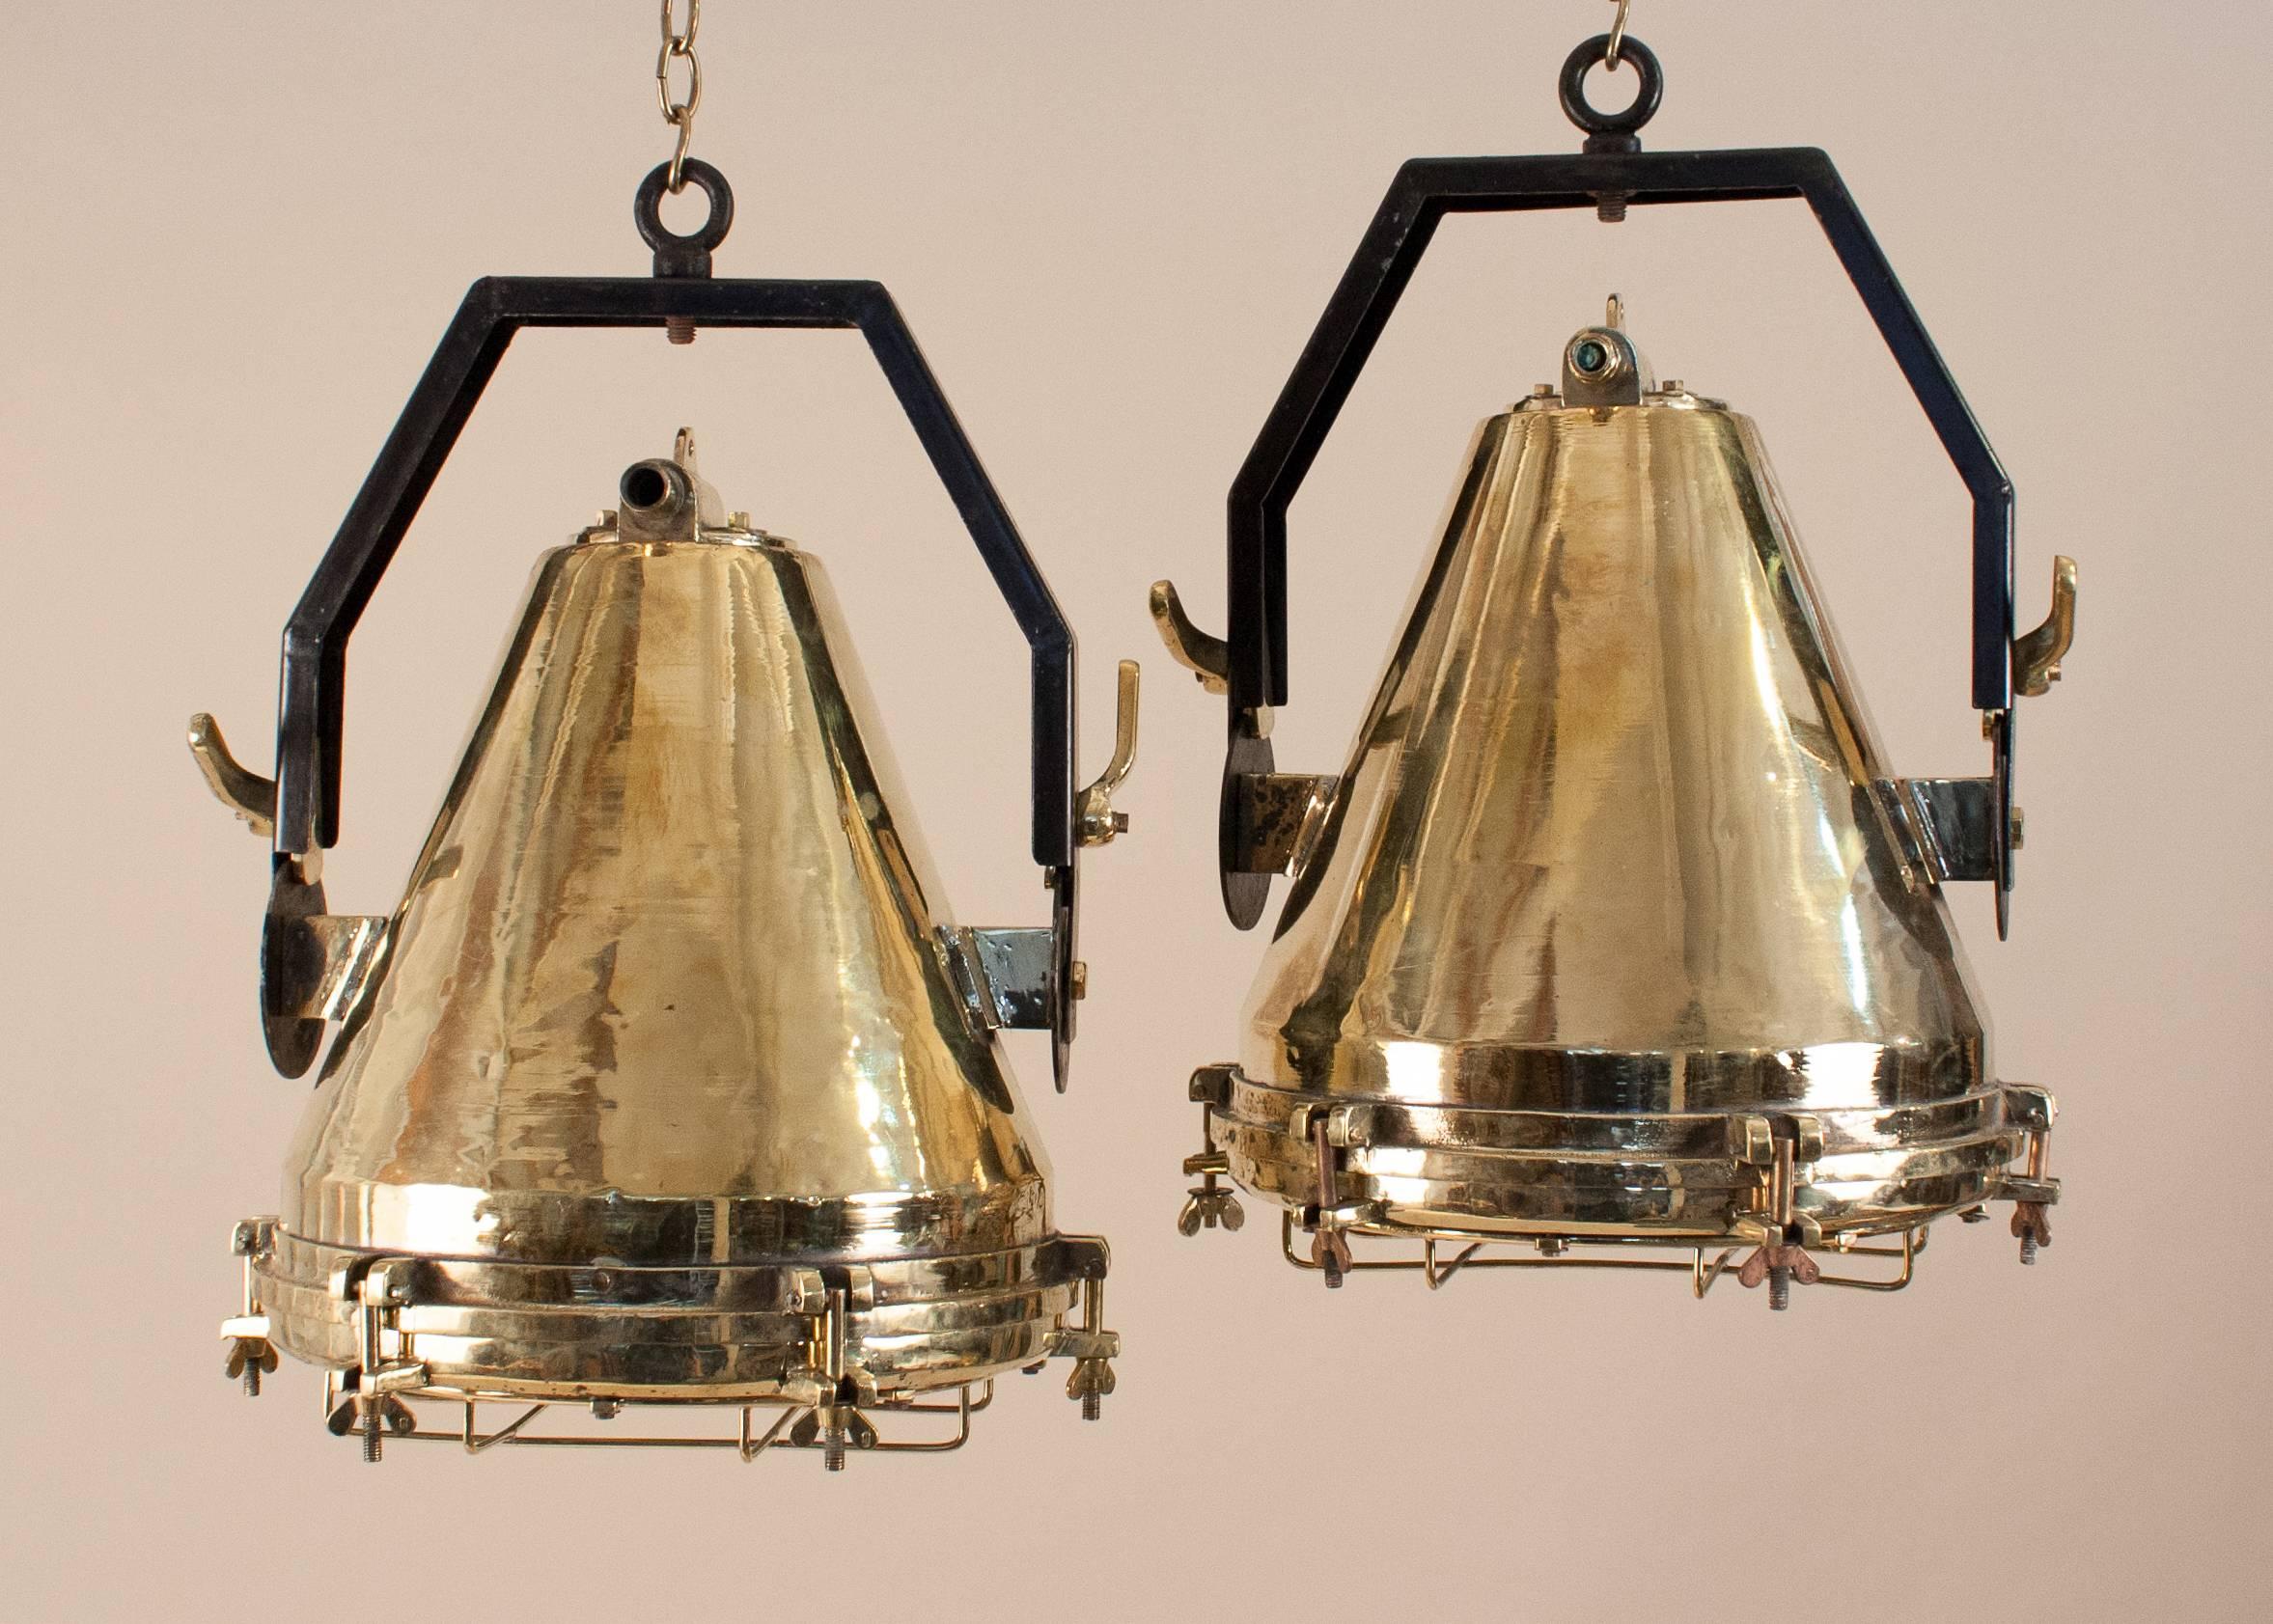 Rare and authentic pair of Mid-Century extra-large polished brass nautical spotlights with great form and patina. Salvaged from a maritime vessel and restored to near-original condition, these fabulous Industrial pendants suspend from adjustable